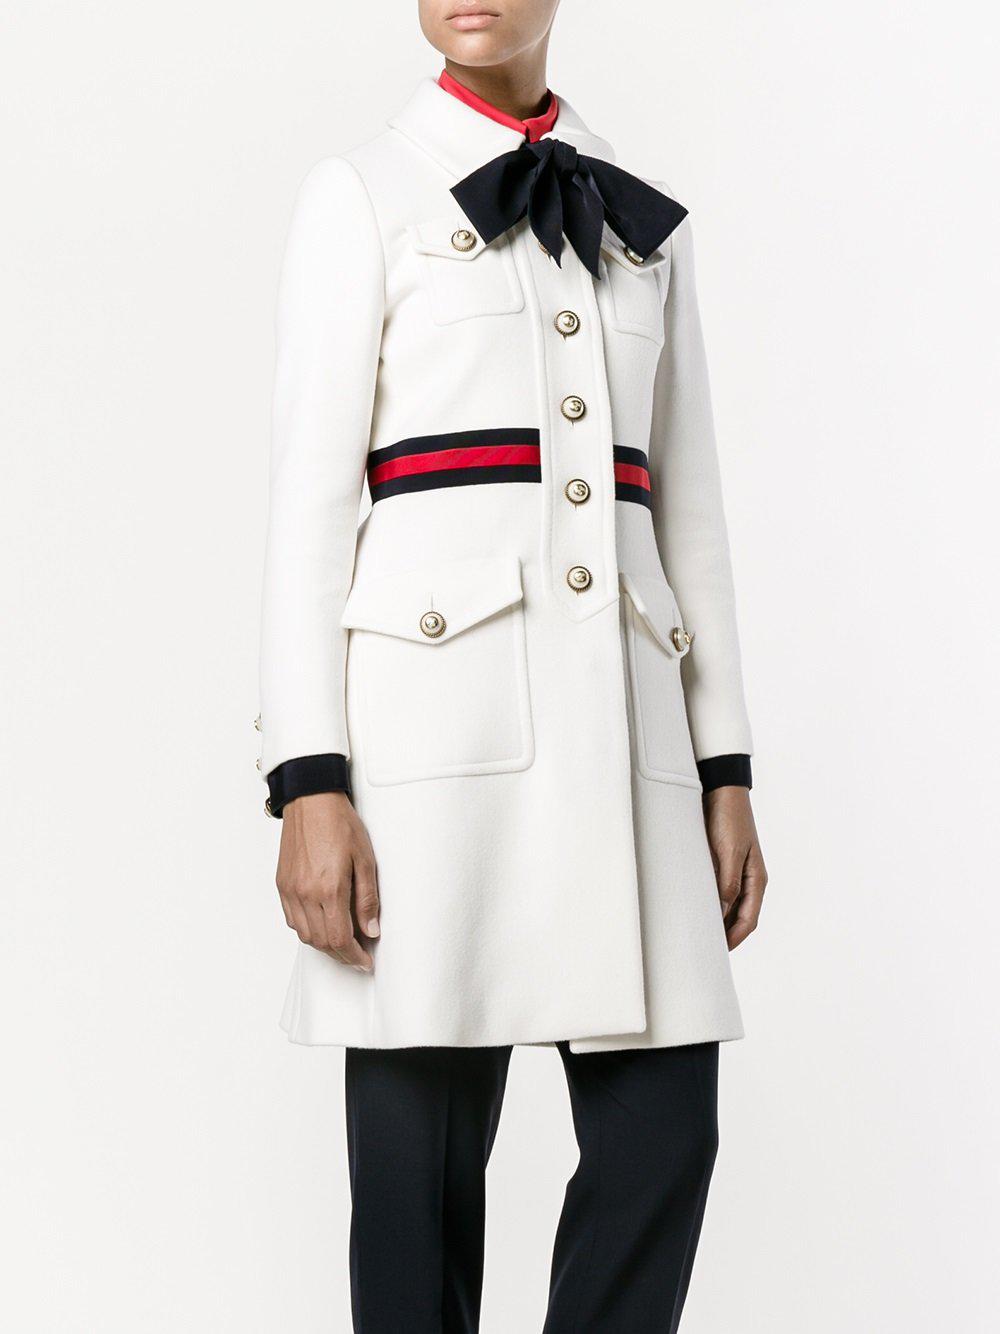 Gucci Embellished Detail Coat in White | Lyst